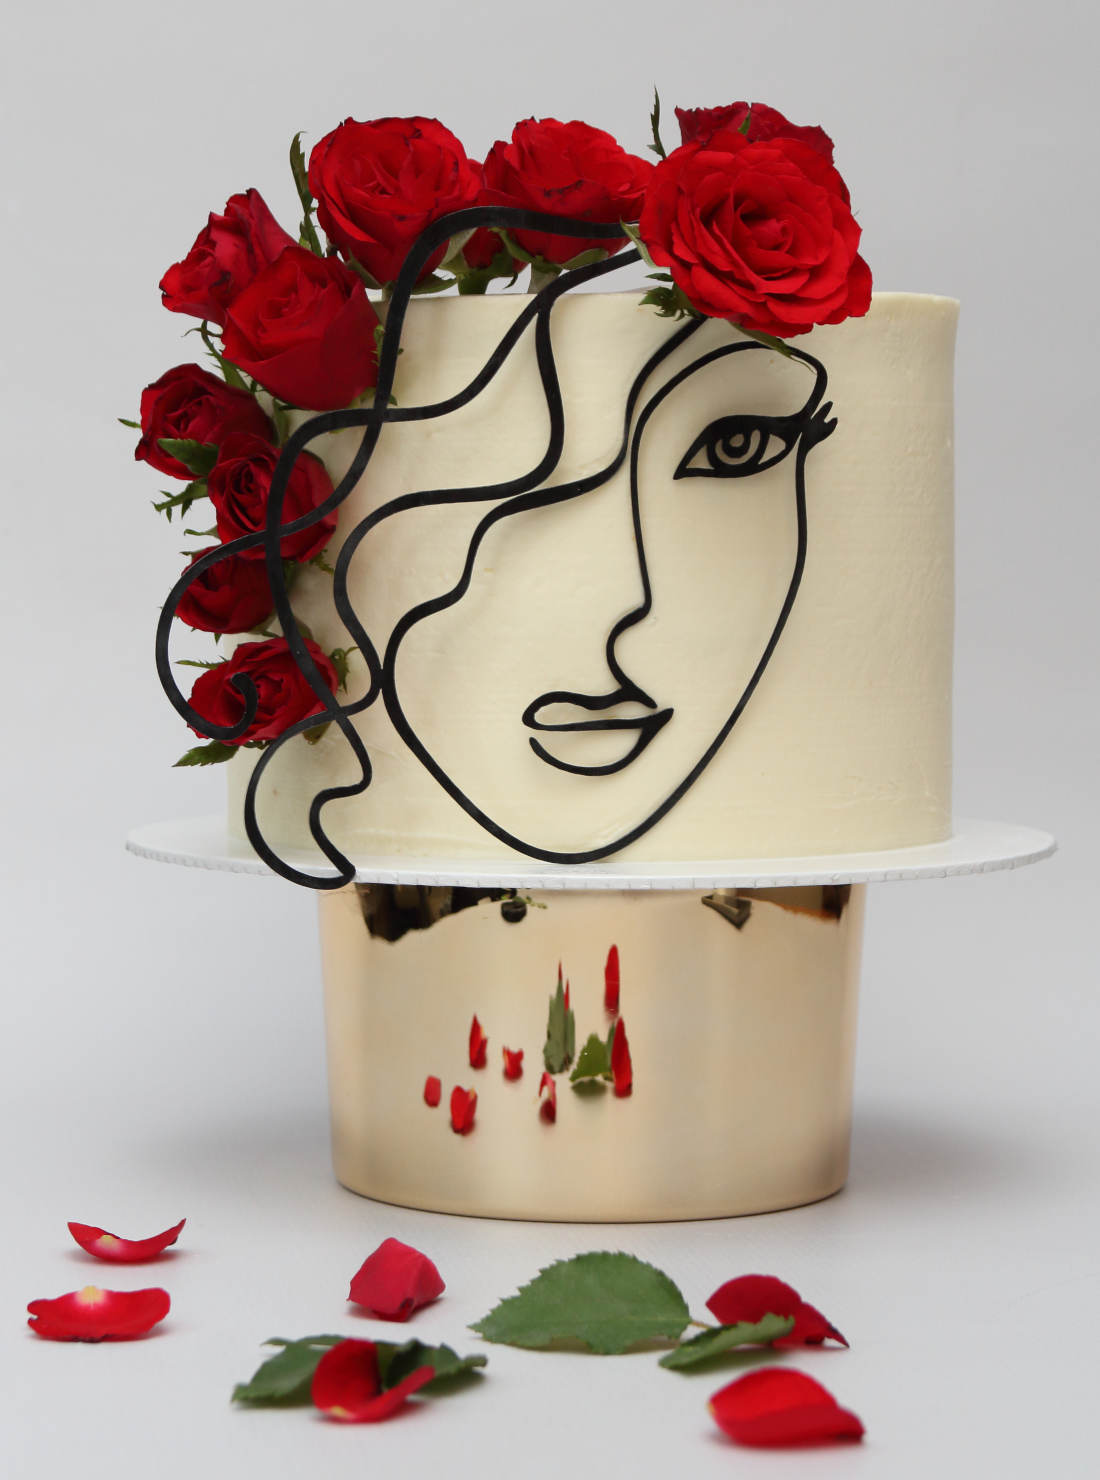 White cake with a woman's face and fresh roses